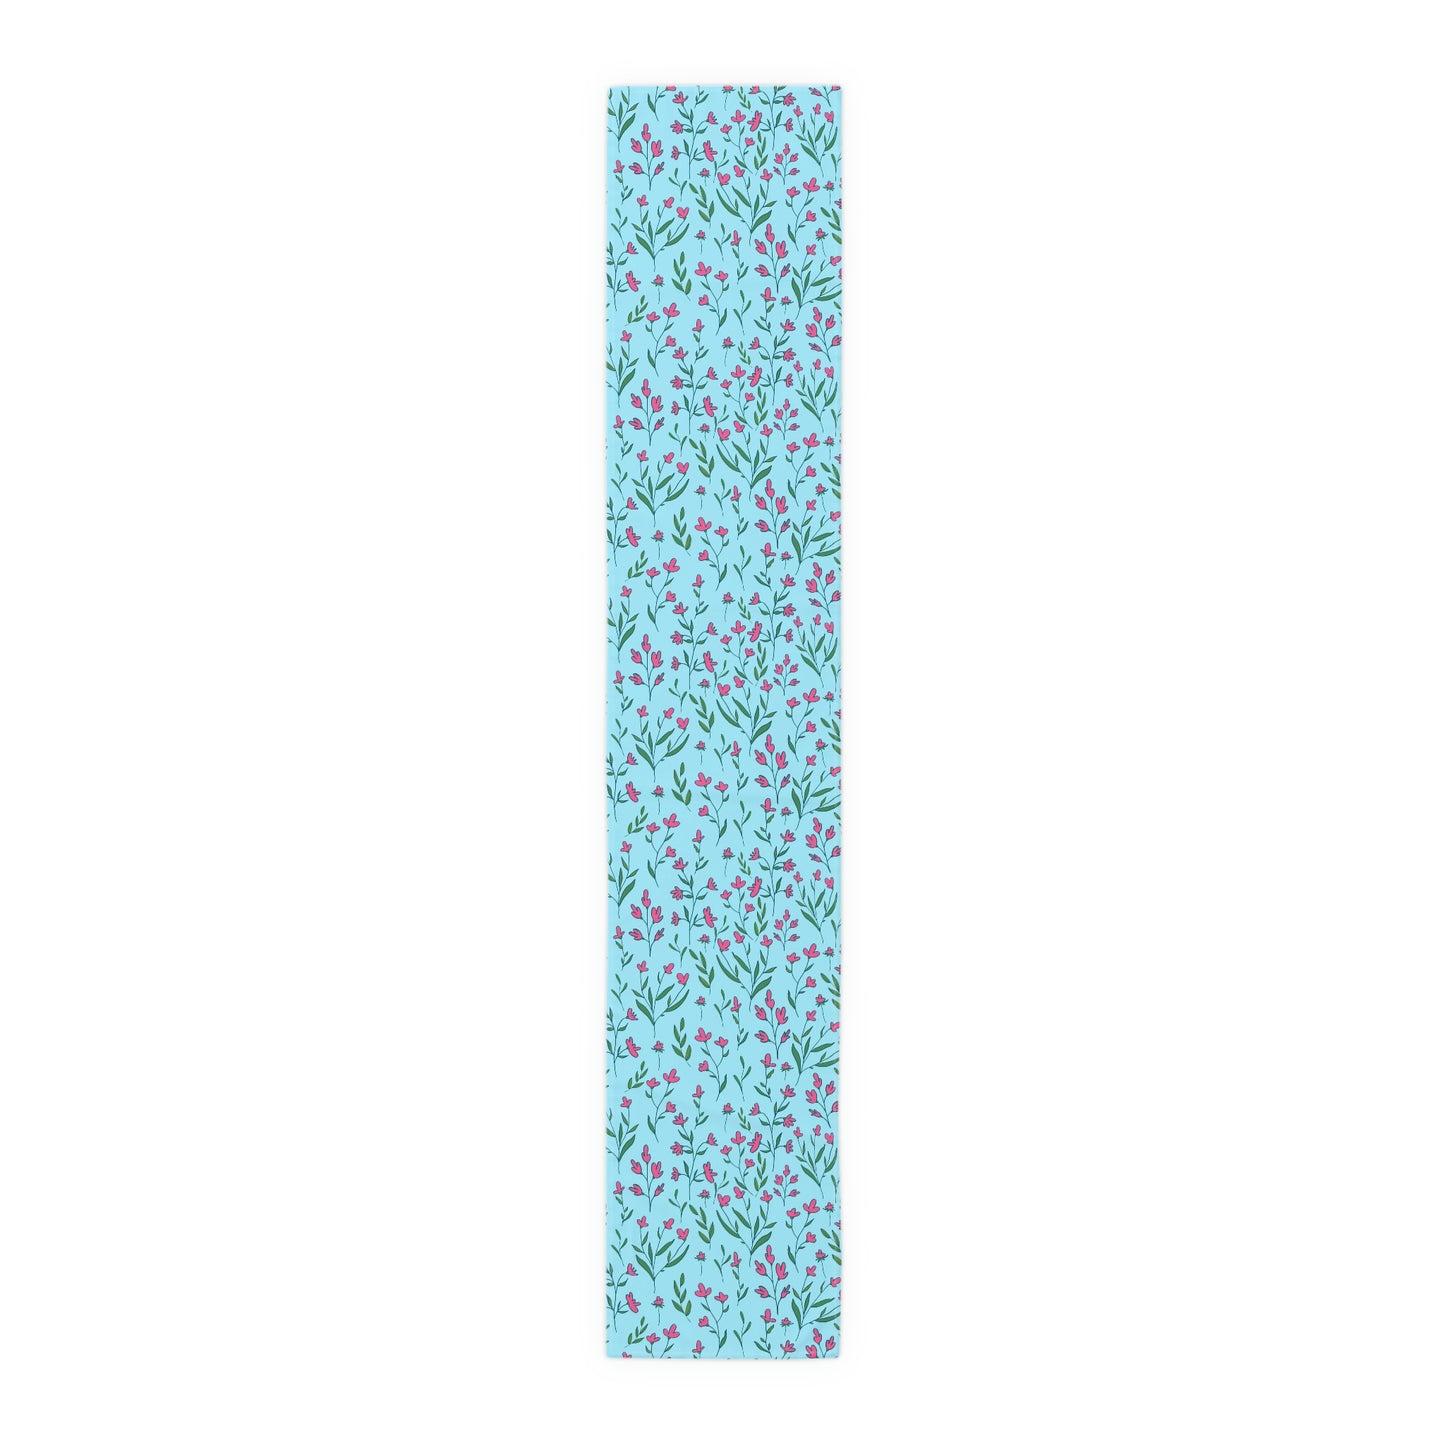 Bright Pink Flowers Table Runner (Cotton, Poly)